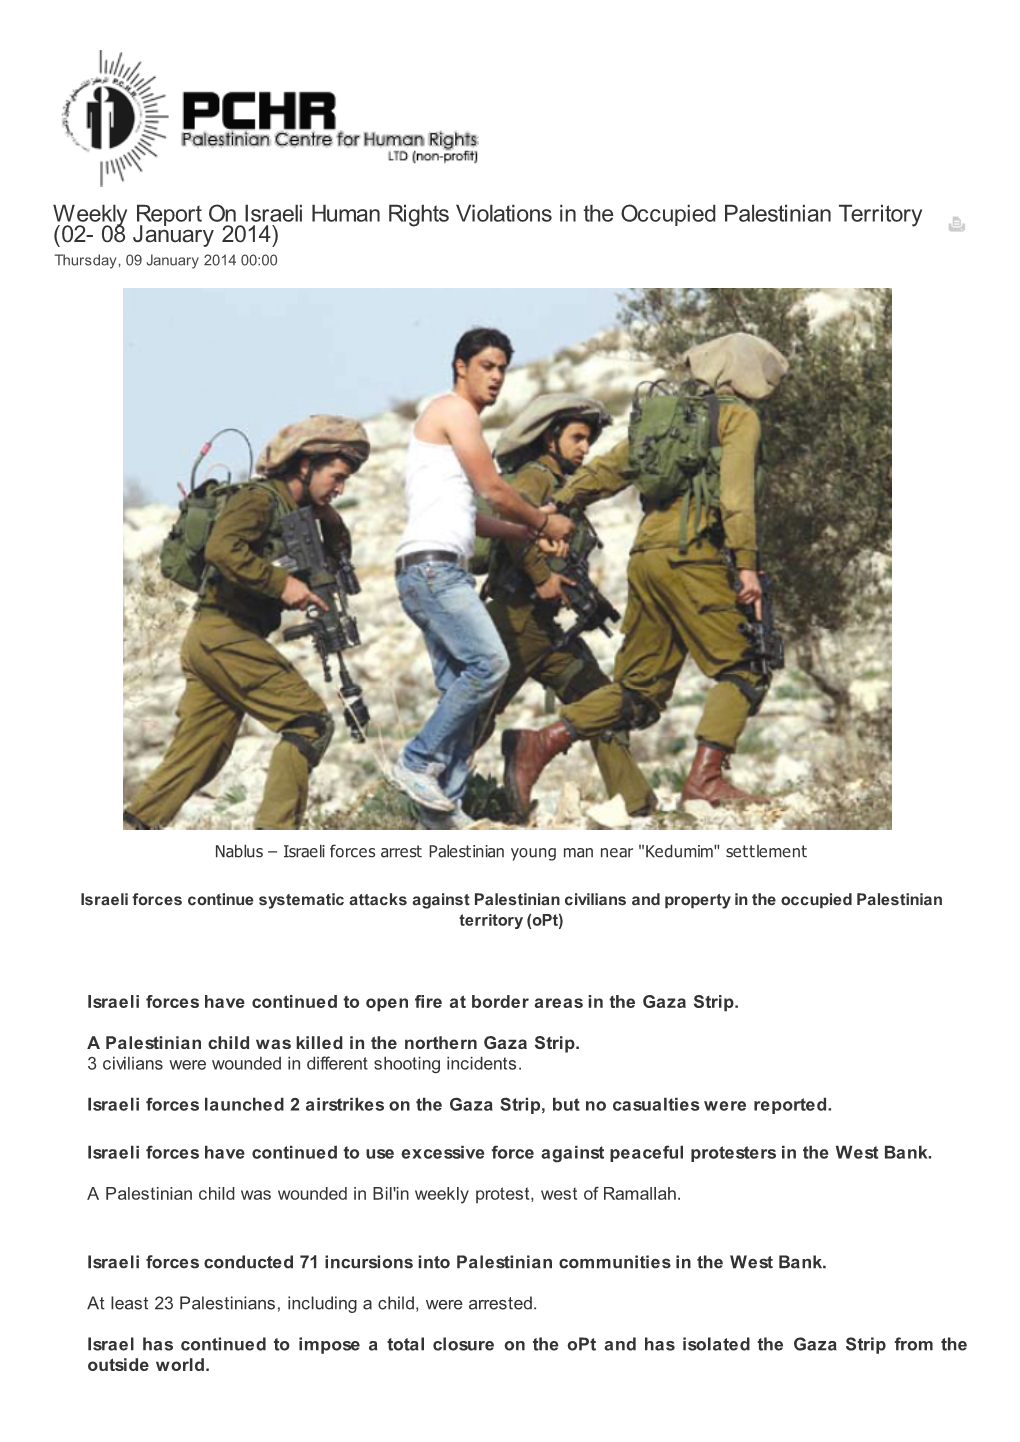 Weekly Report on Israeli Human Rights Violations in the Occupied Palestinian Territory (02- 08 January 2014) Thursday, 09 January 2014 00:00